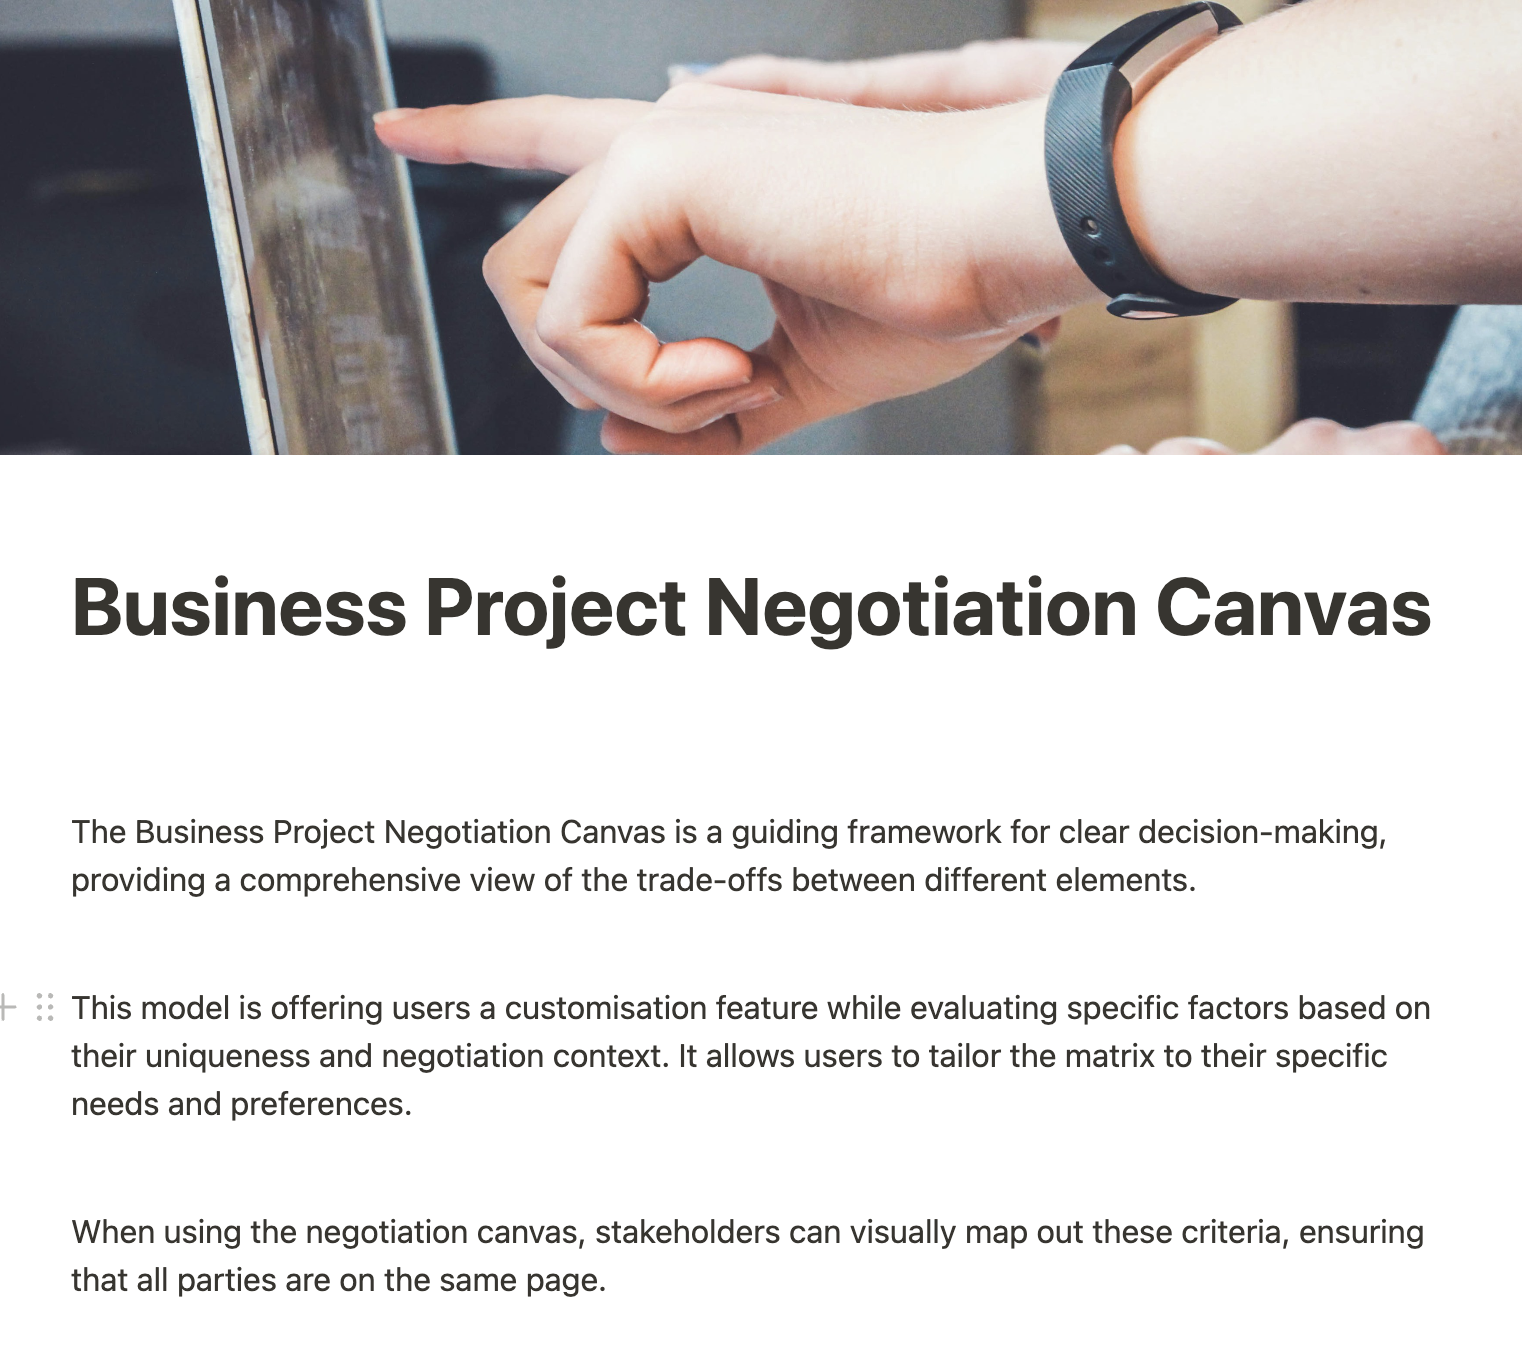 The Business Project Negotiation Canvas is a guiding framework for clear decision-making, providing a comprehensive view of the trade-offs between different elements.